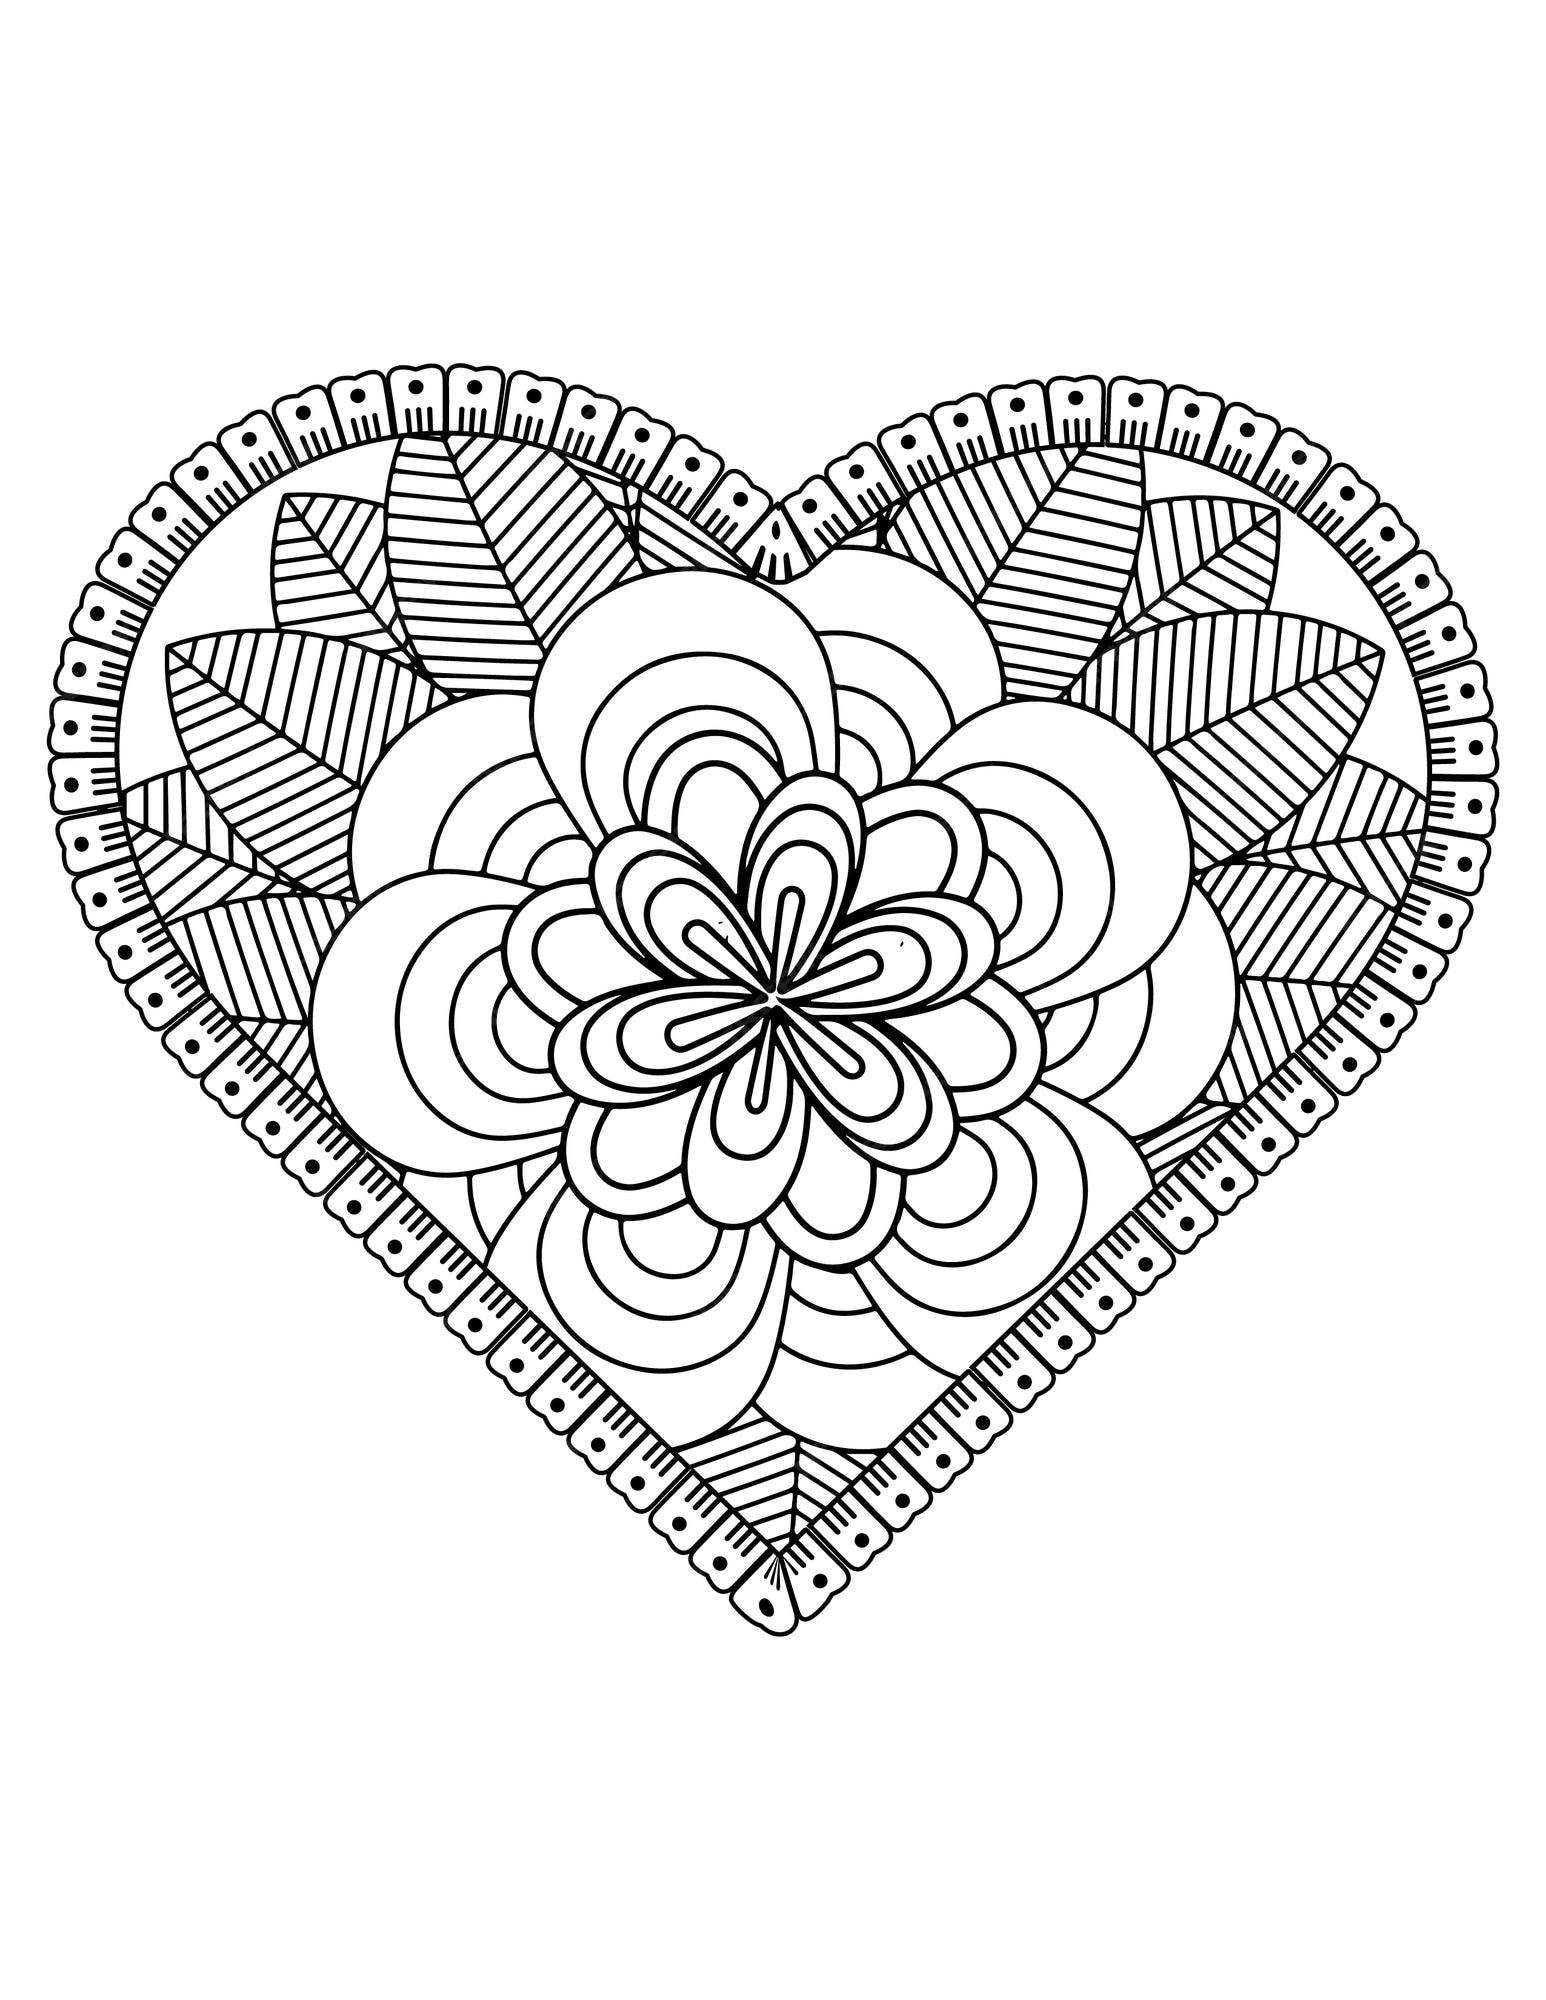 Premium vector heart coloring page for adult and kids love coloring vector valentine pattern design valentine